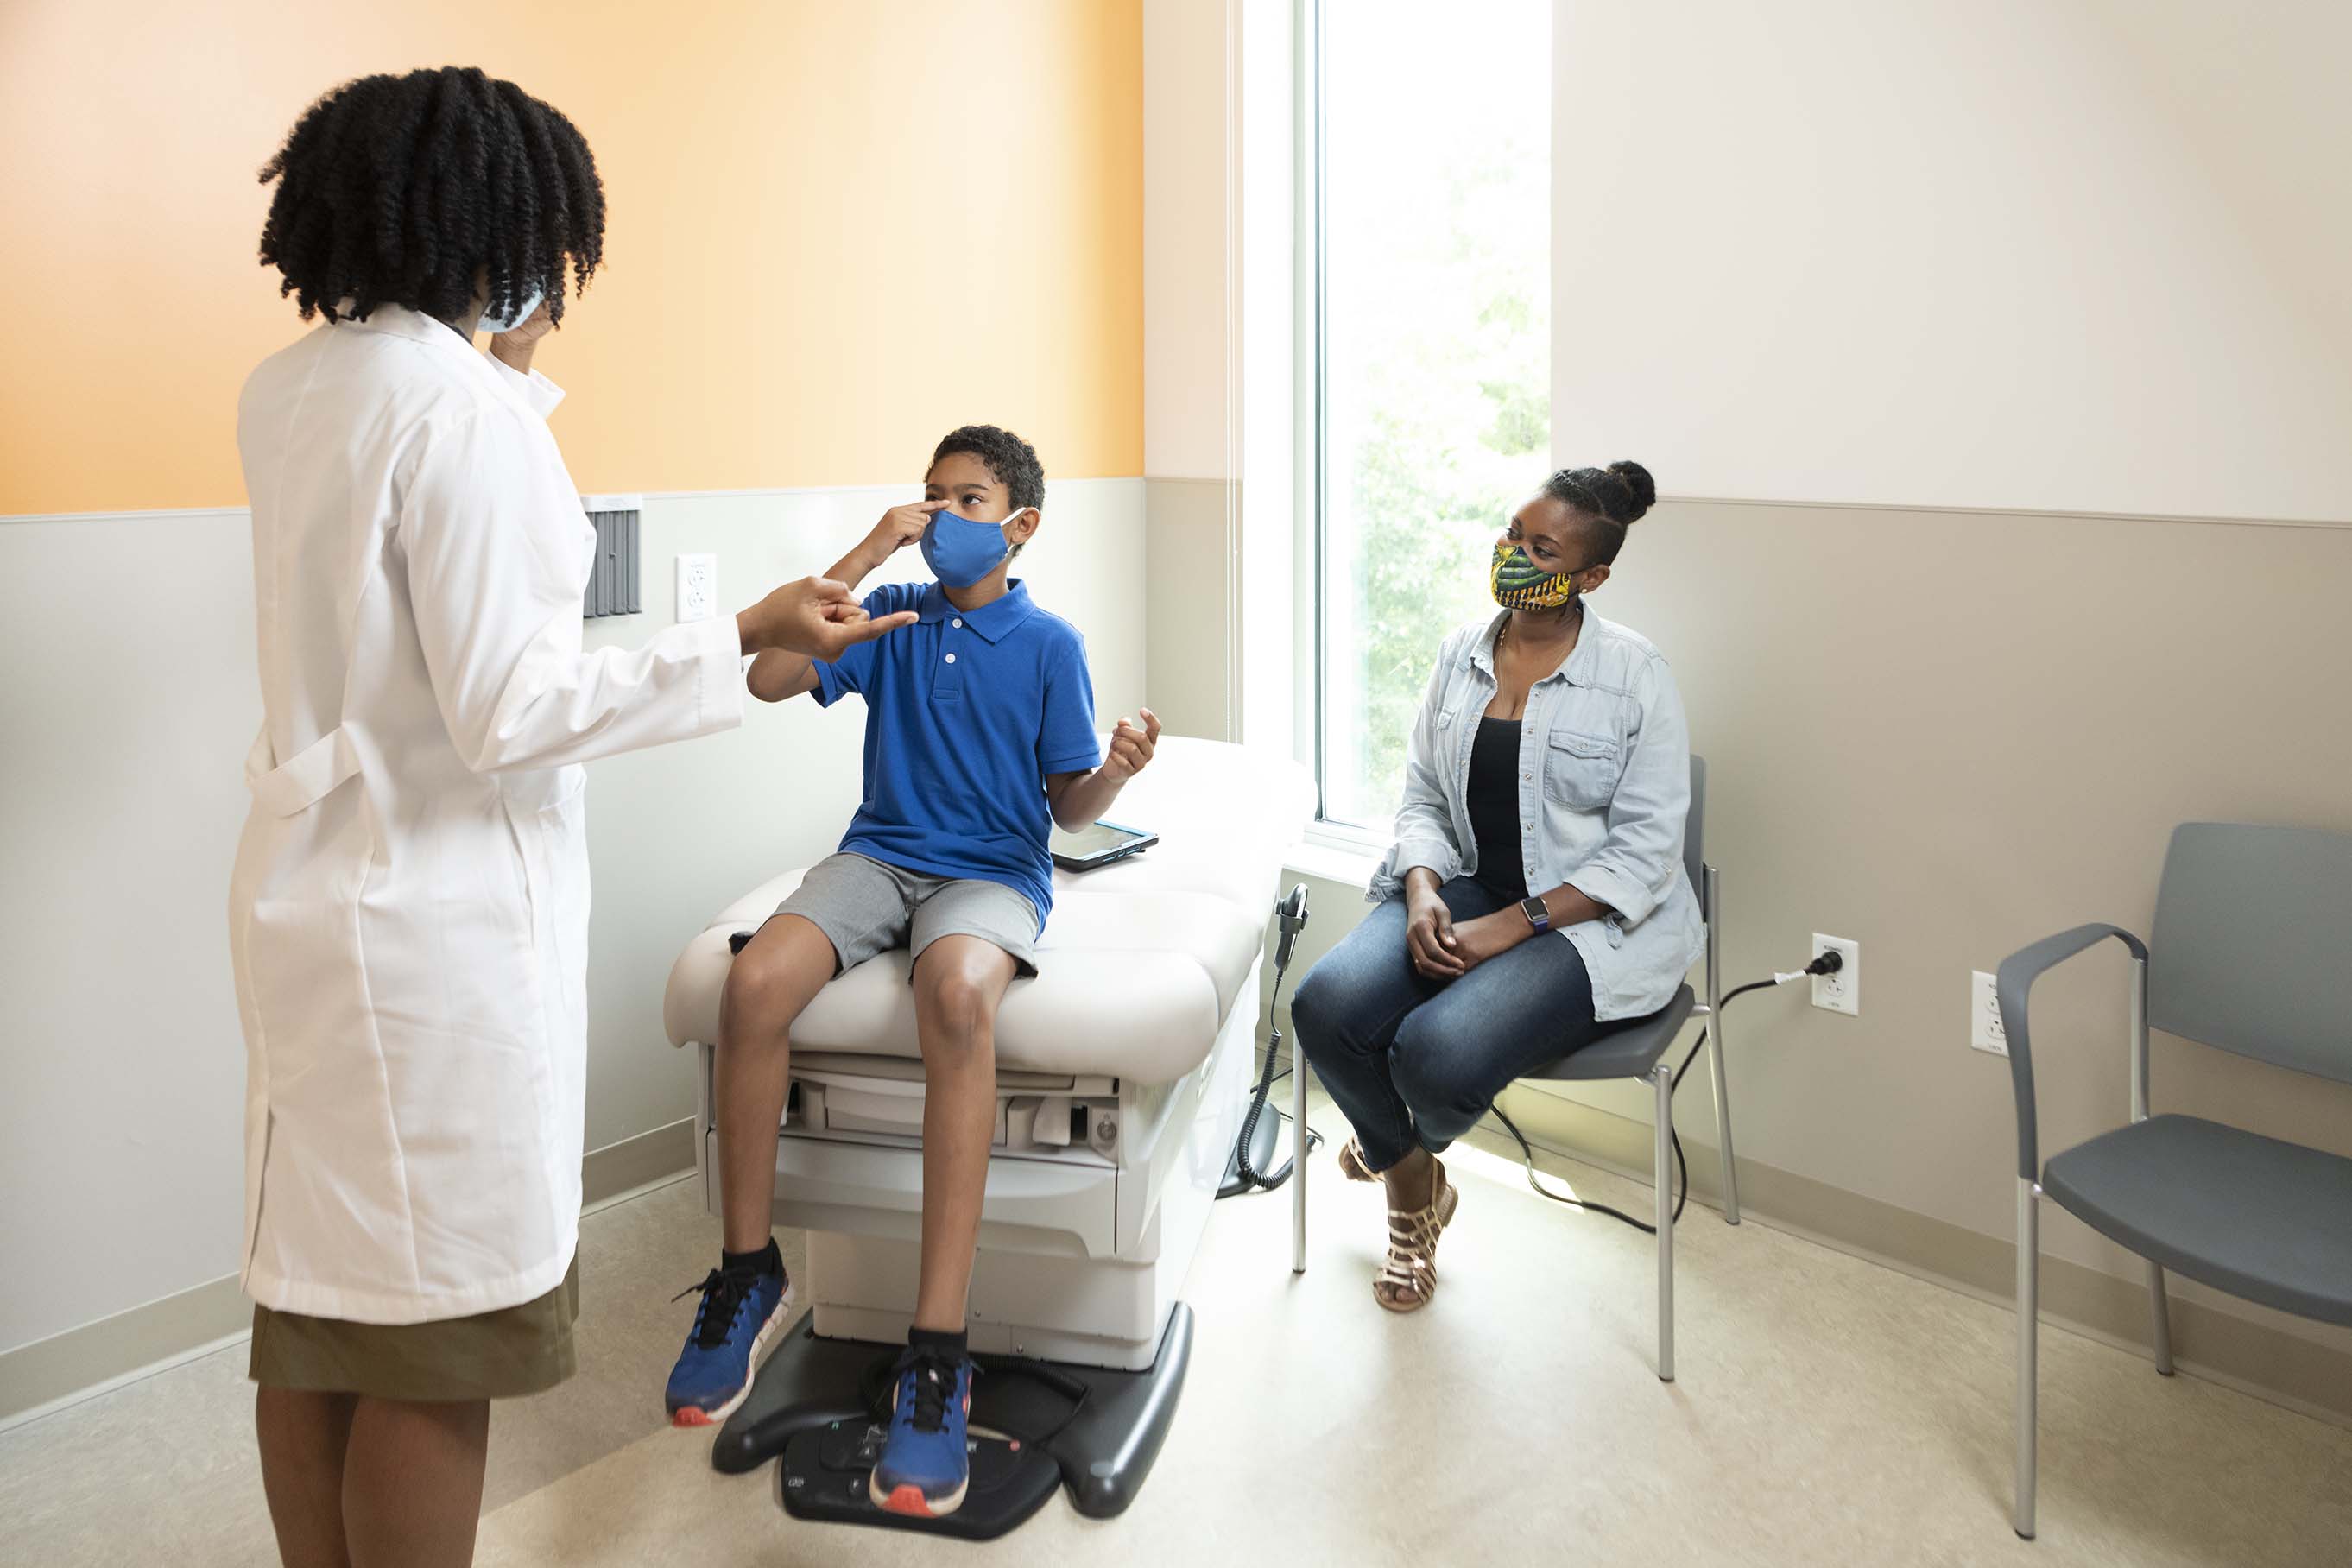 Young boy in pediatric exam room with pediatrician